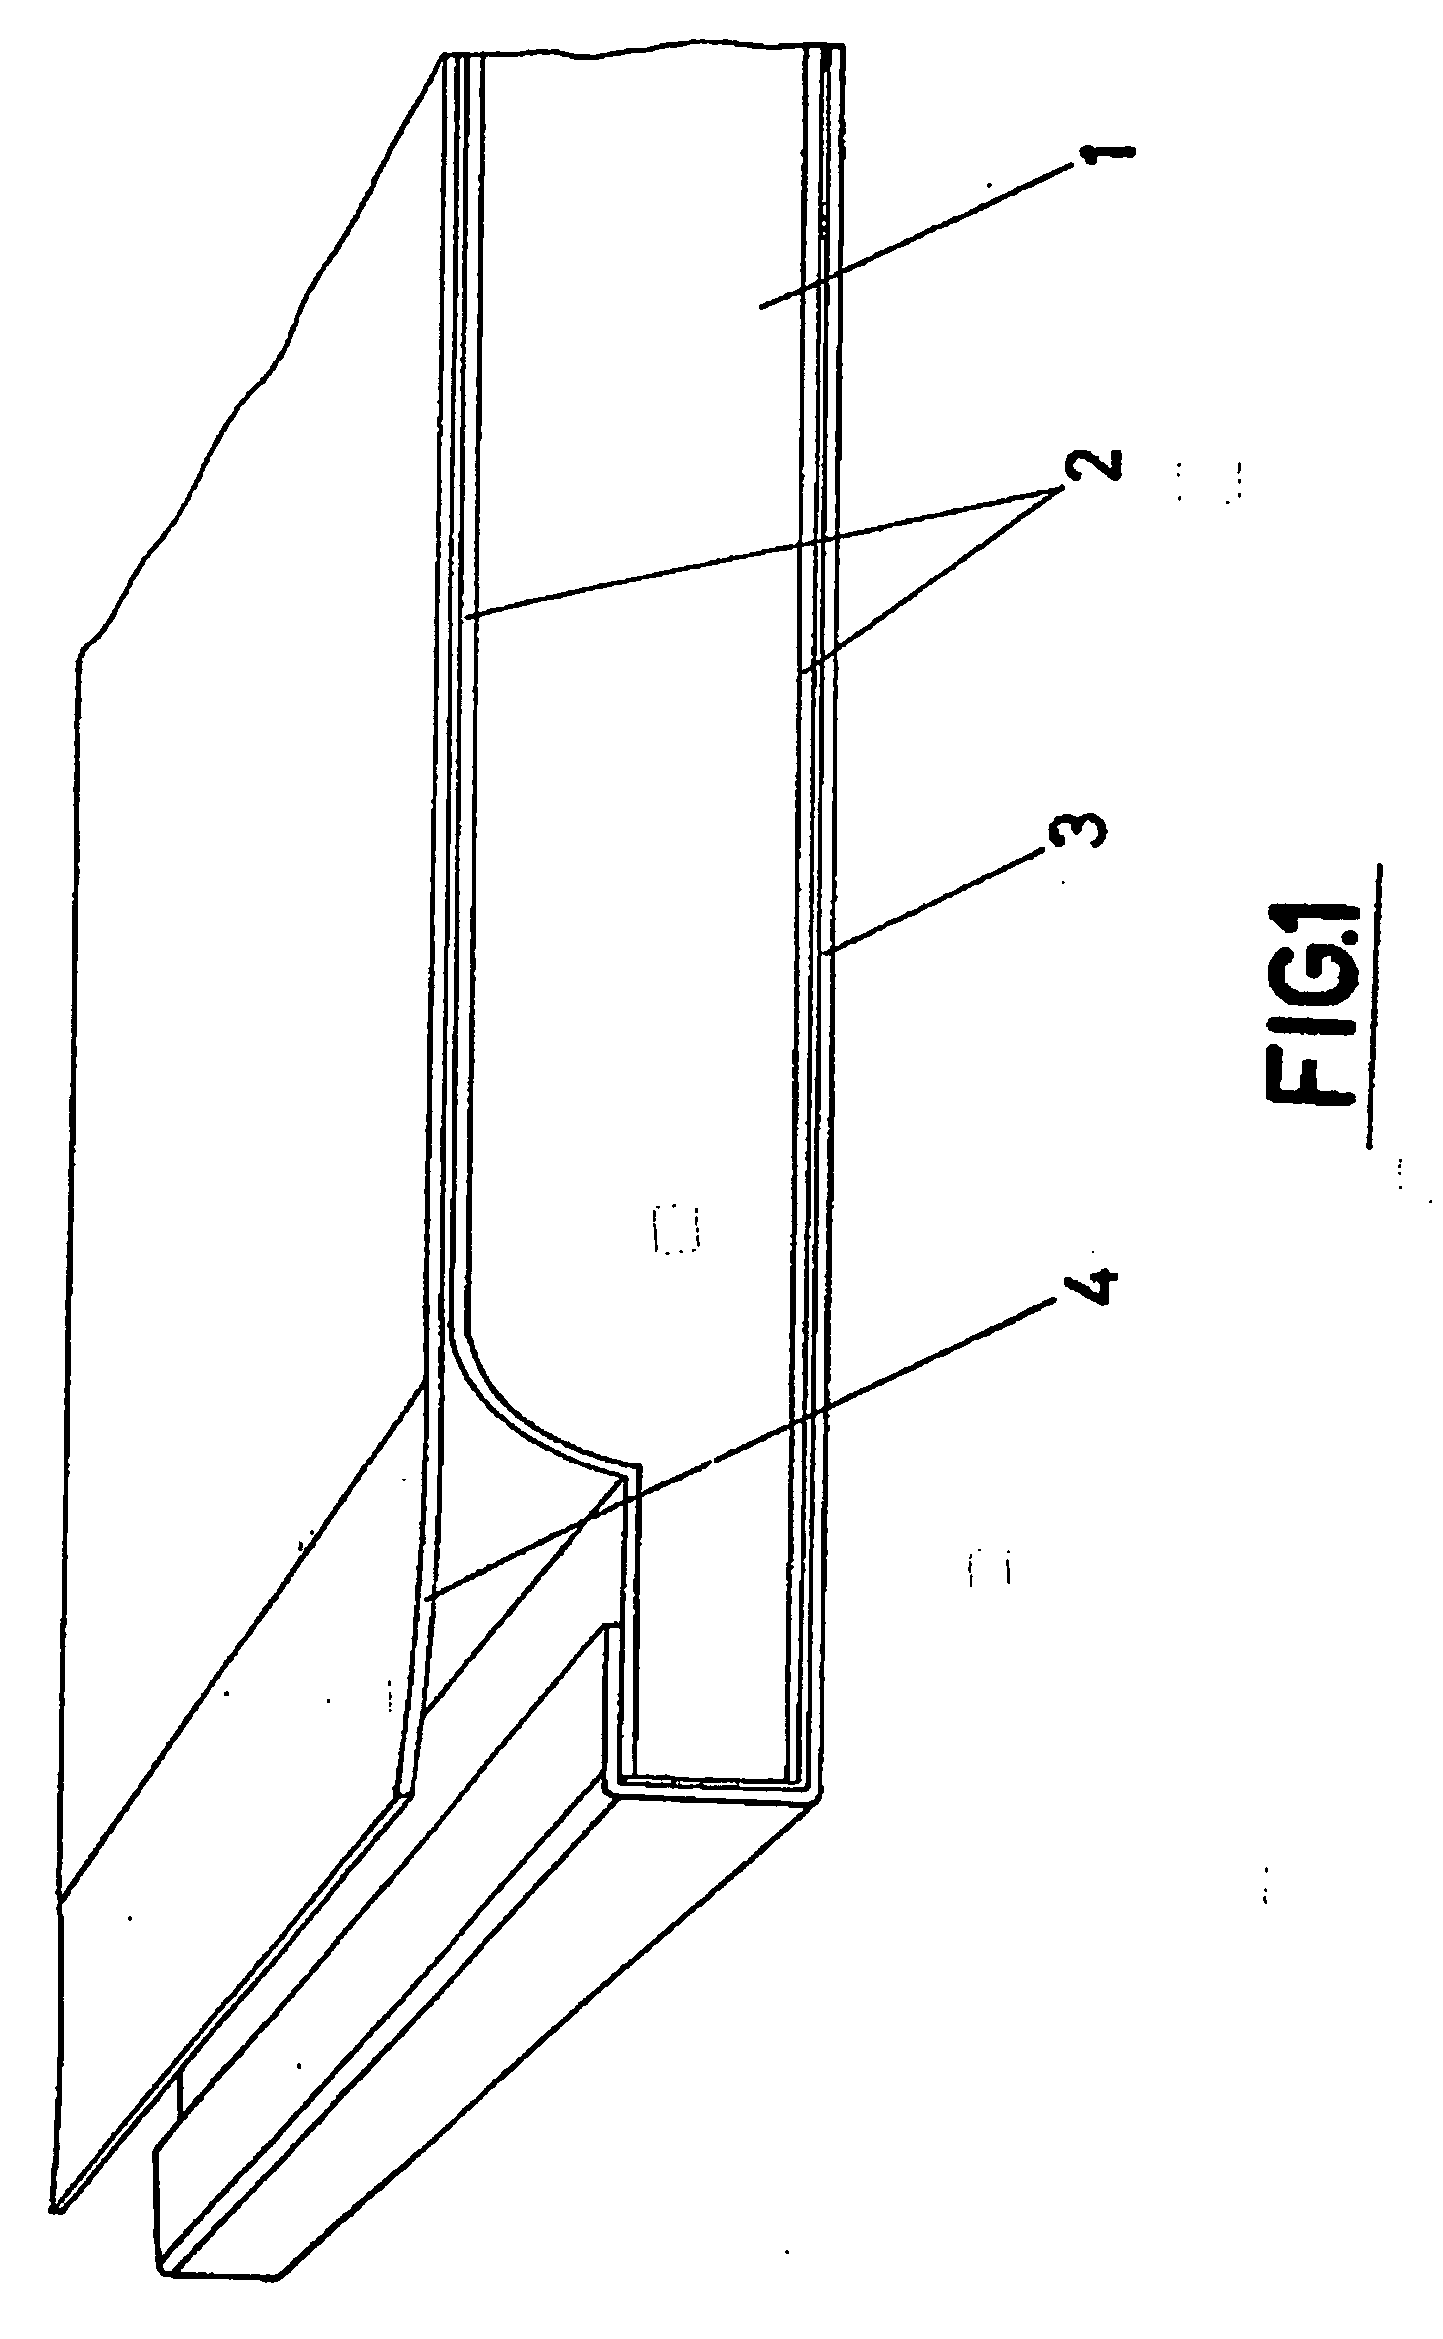 Mineral wool panel comprising a web which covers both faces thereof